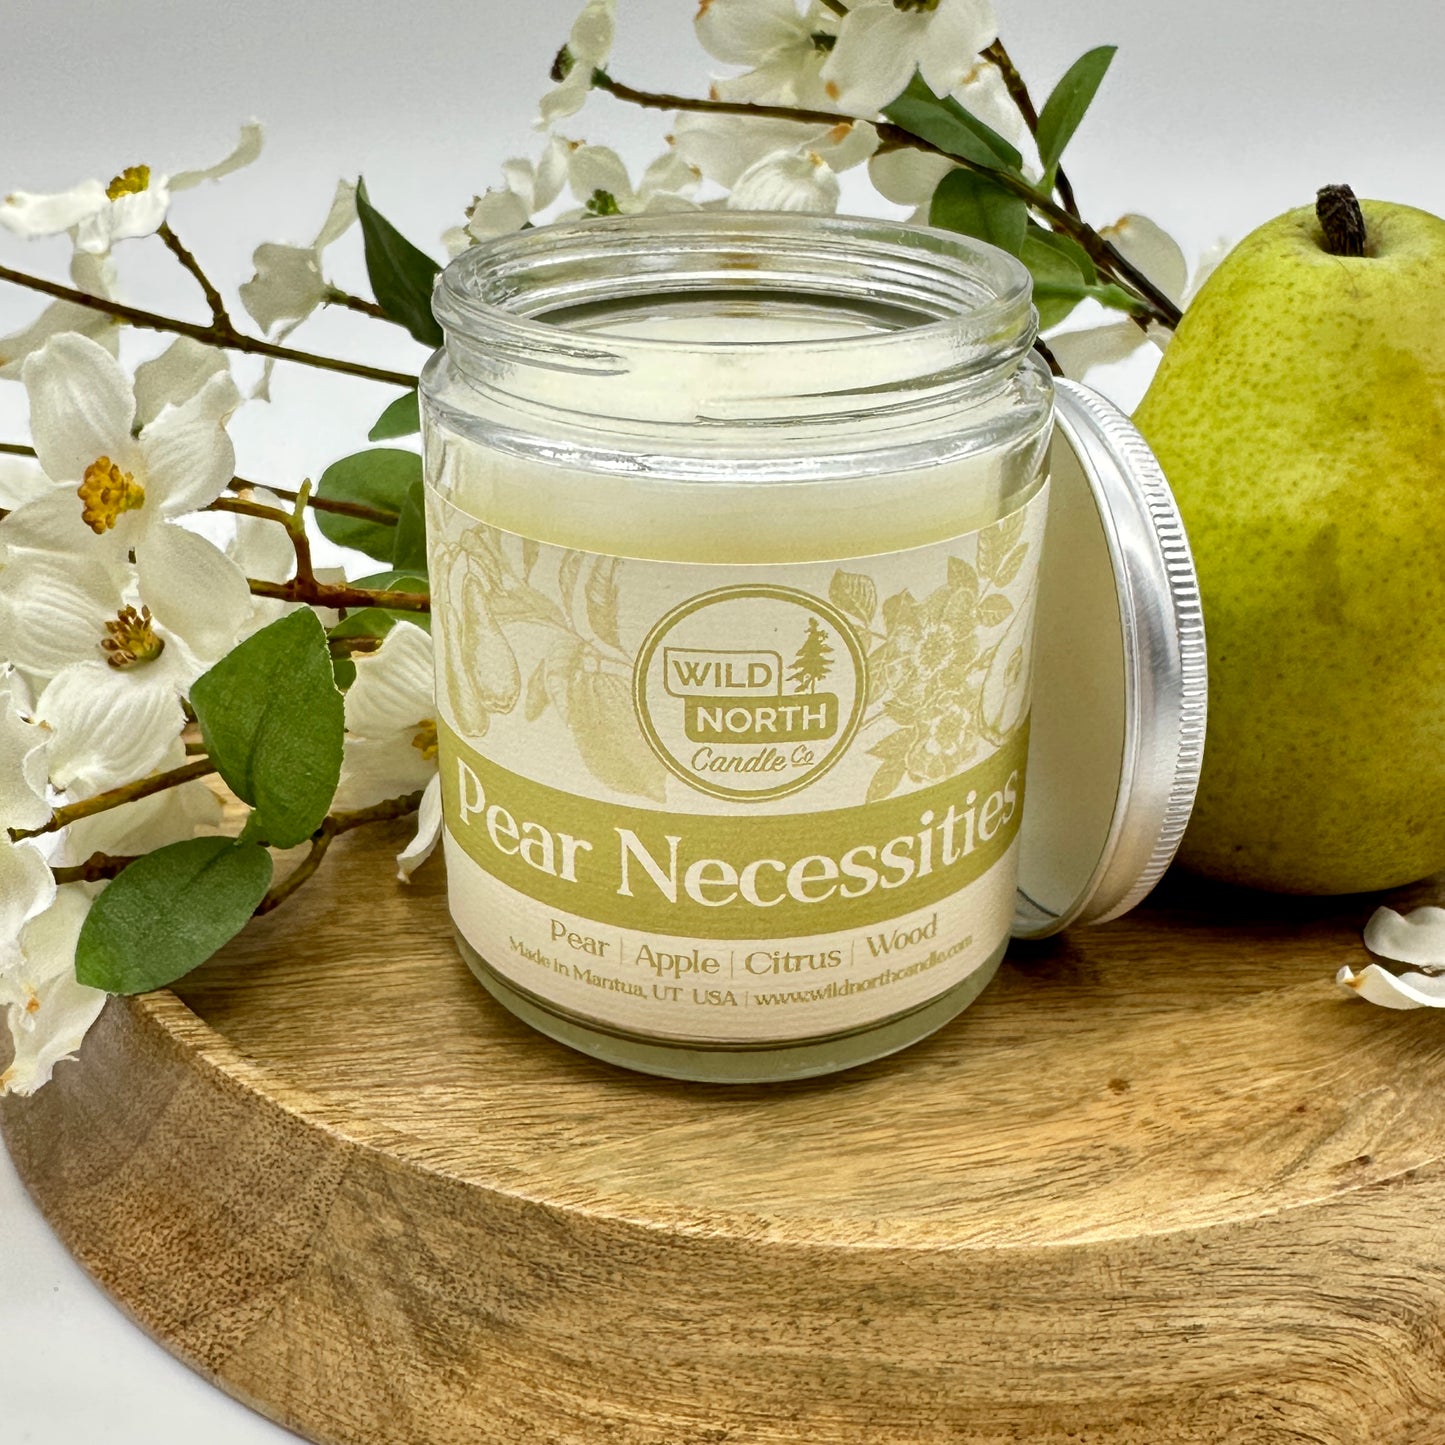 Pear Necessities Soy Blend Wax Candle